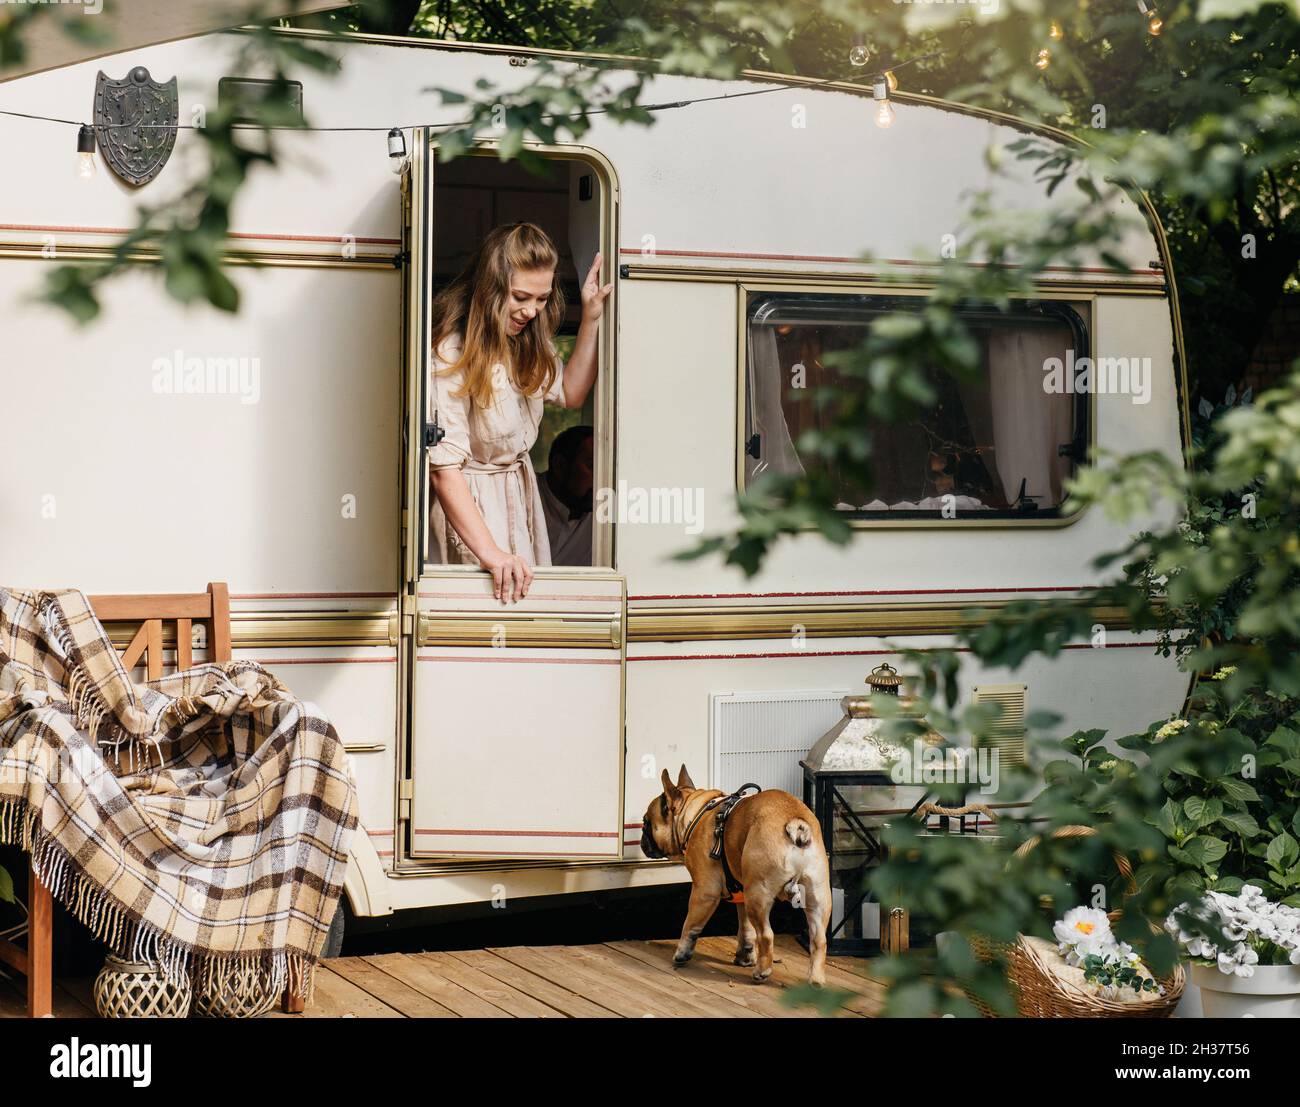 Camping and travelling . Happy person relaxing outdoors near trailer. Woman with dog is ready for road trip, Cozy sunny morning Stock Photo